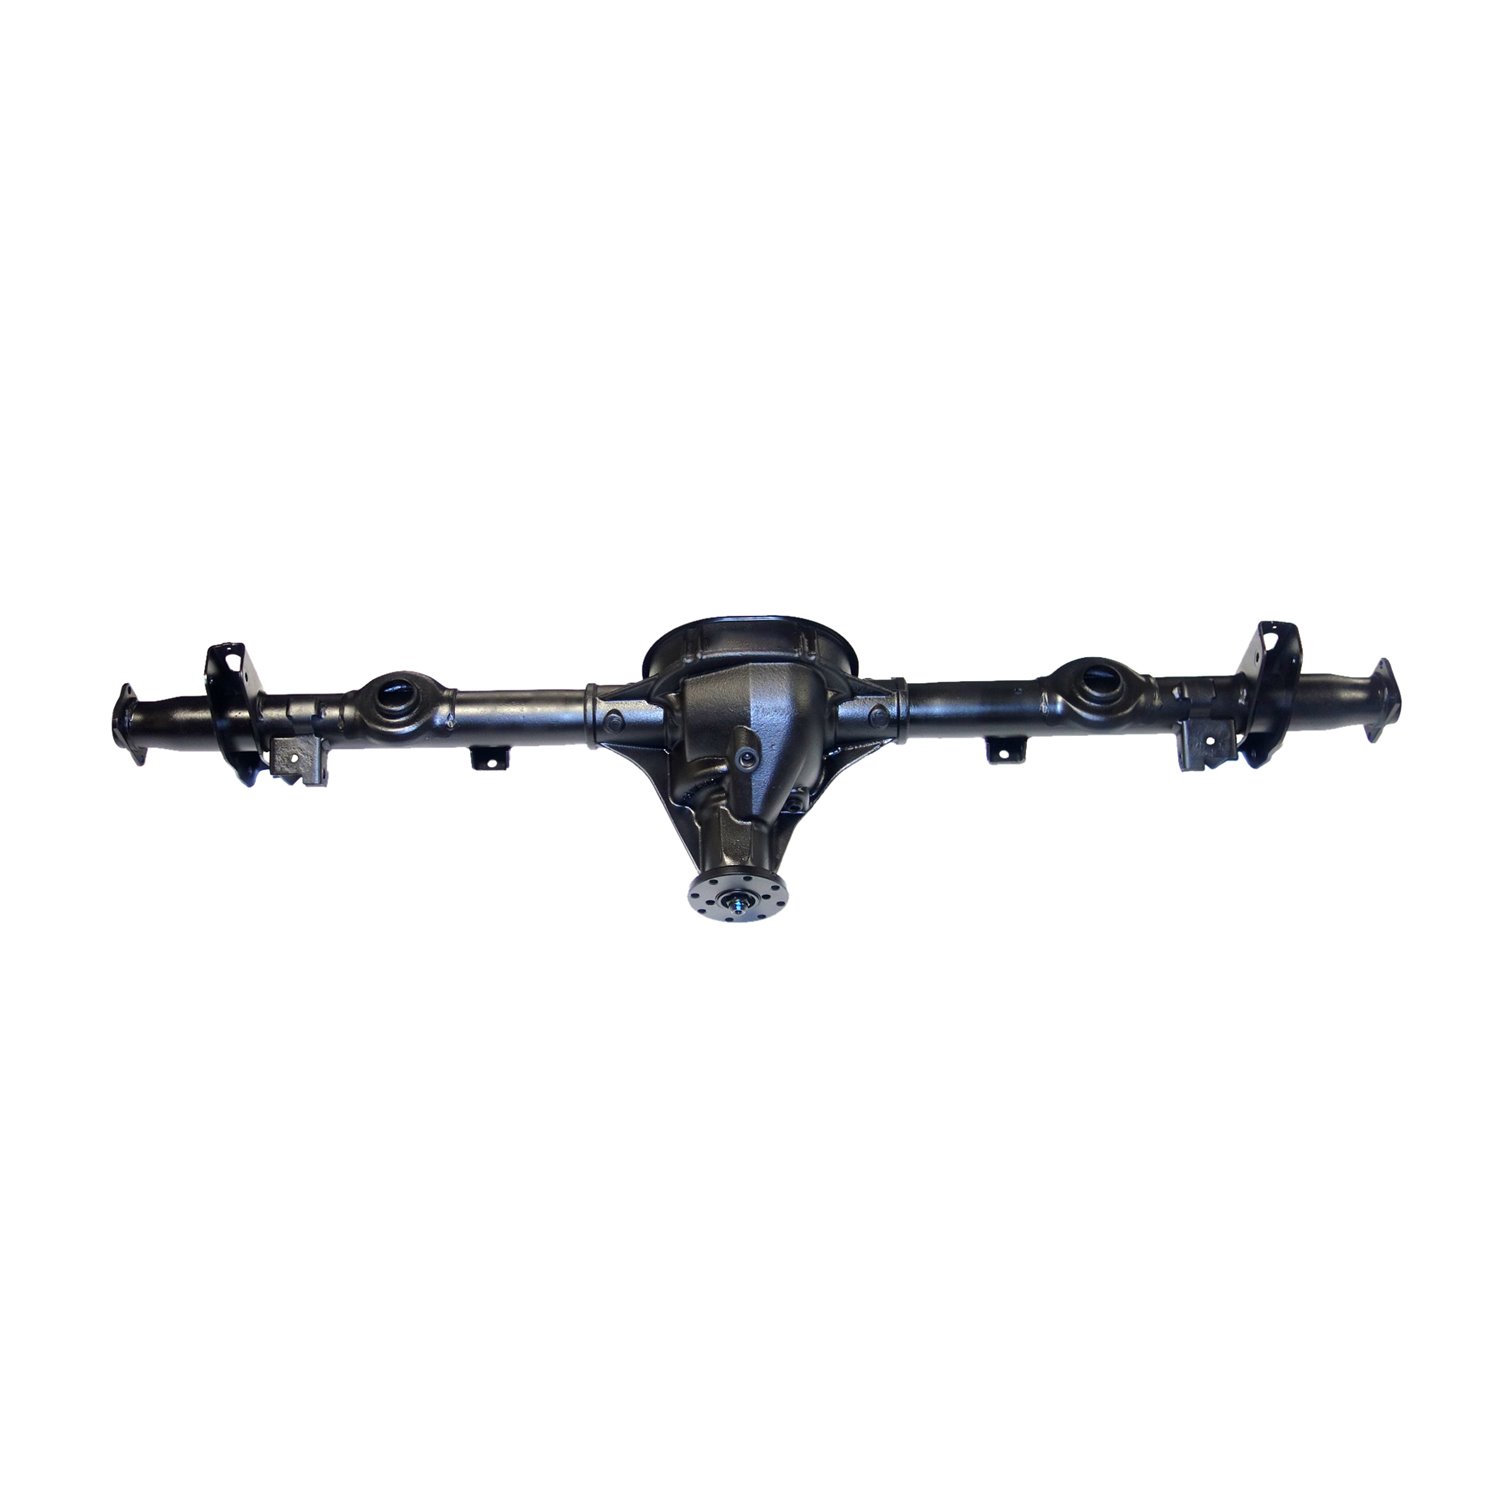 Remanufactured Complete Axle Assy for 8.8" 92-94 Crown Vic, G. Marquis, Disc Brakes, ABS